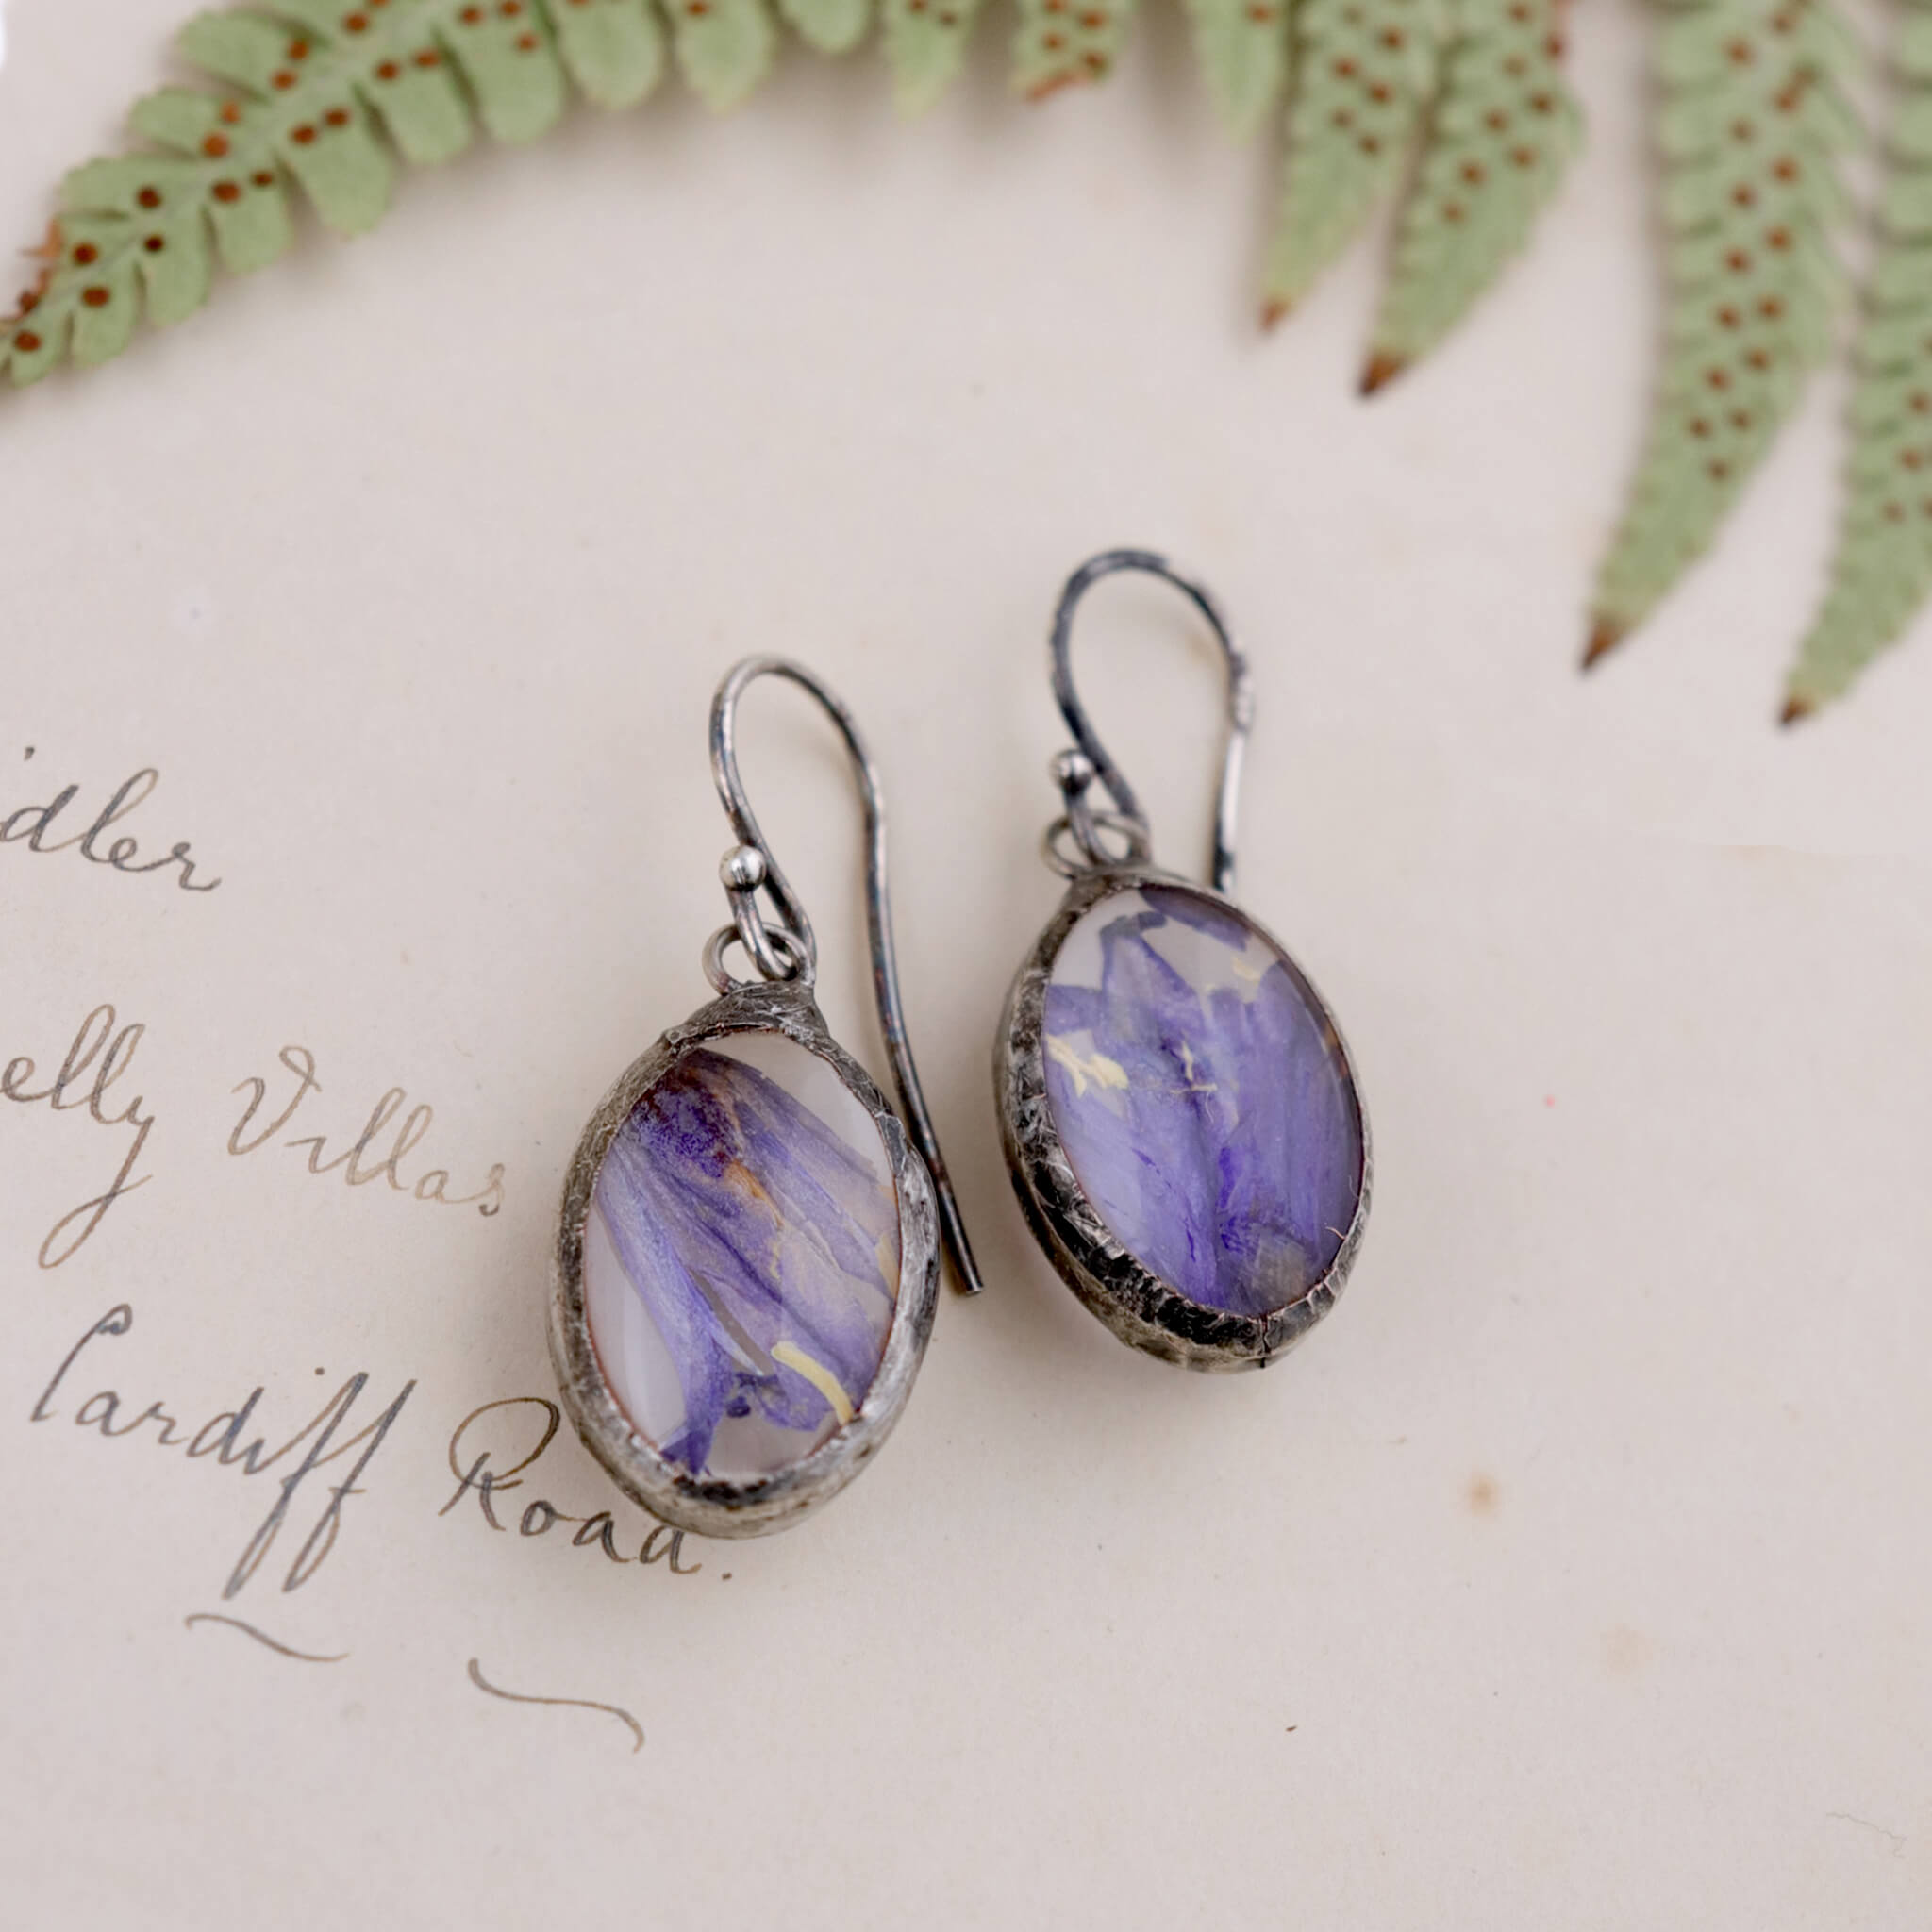 Pressed bluebells earrings in tiffany style lying flat on a vintage papery